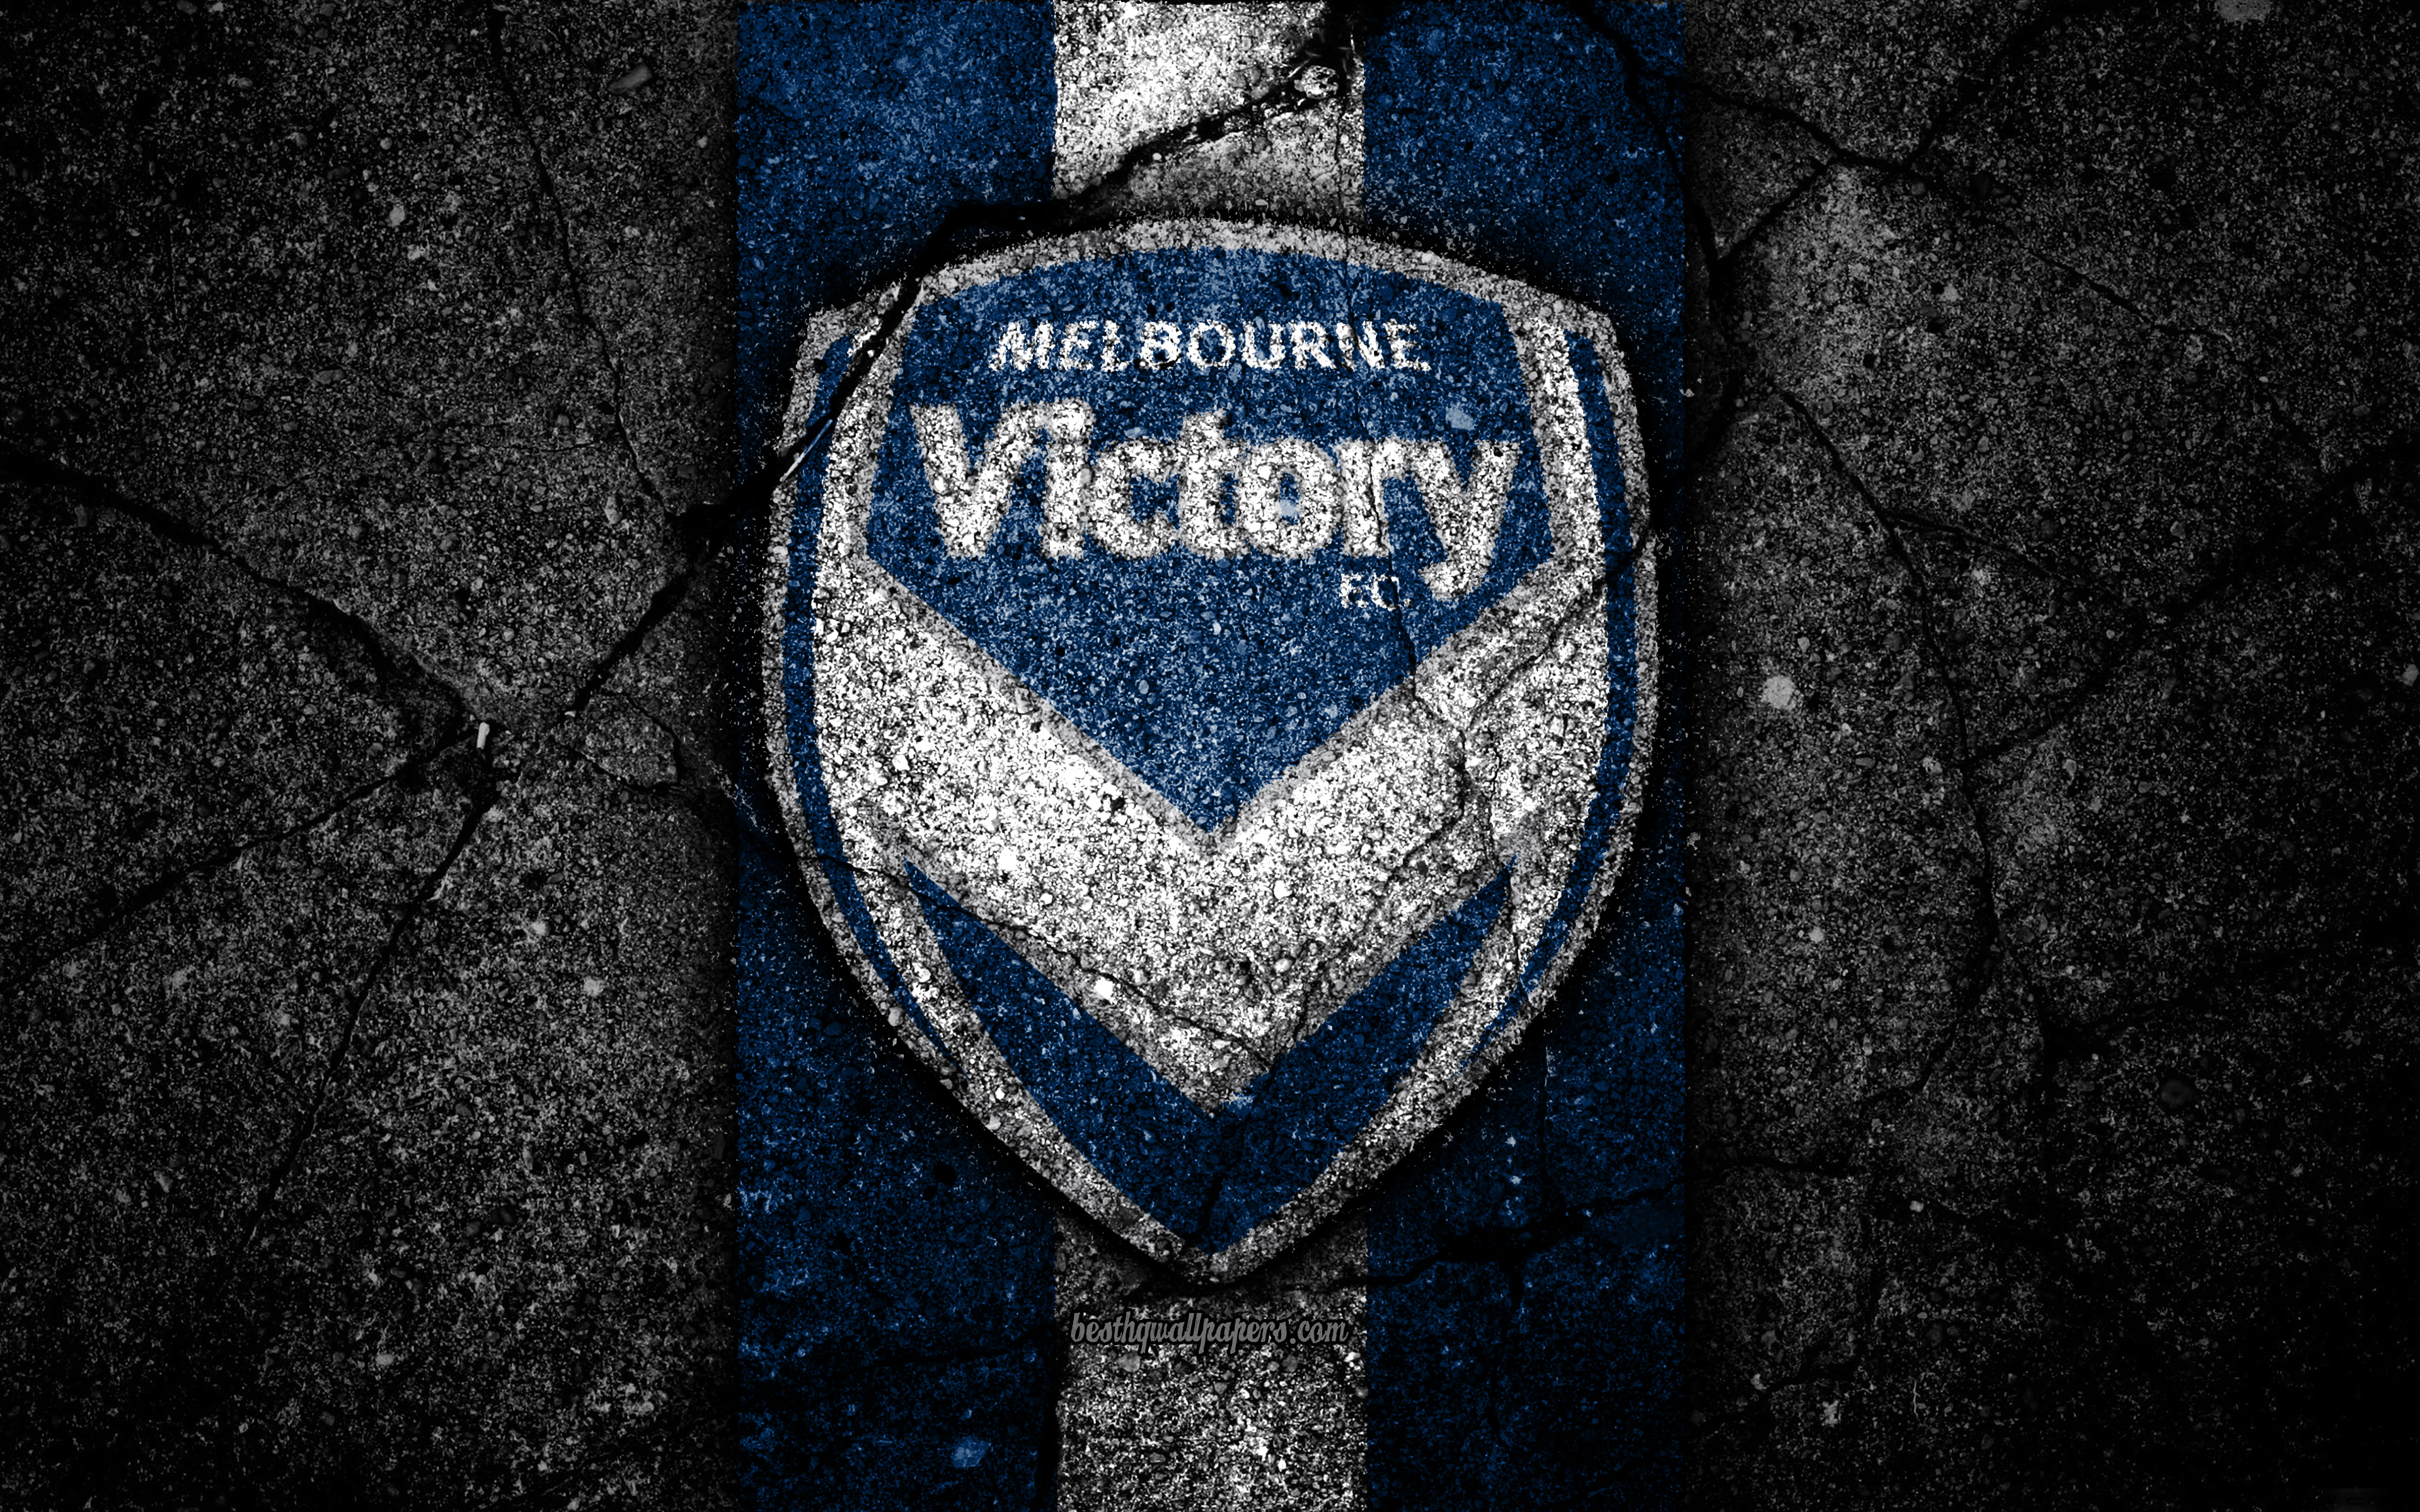 Melbourne Victory Fc Wallpapers